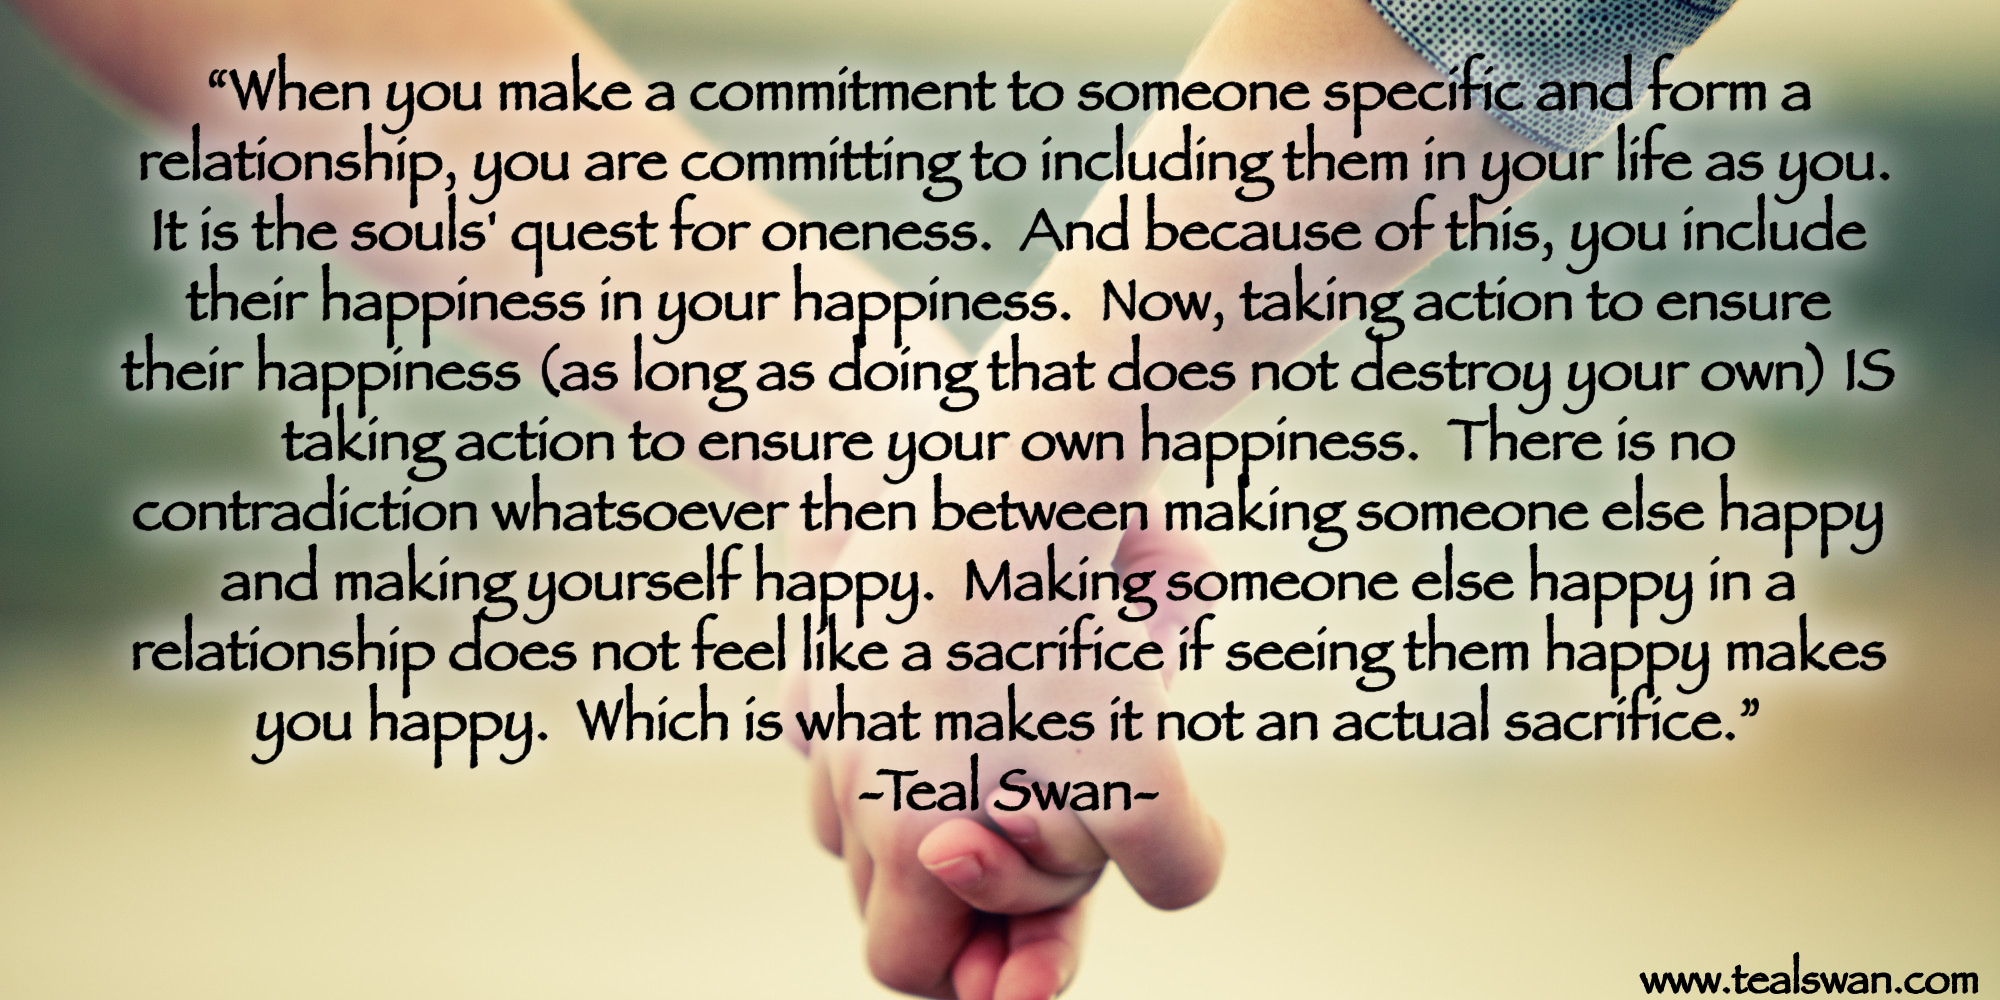 When you make a commitment to someone specific and form a relationship, you are committing to including them in your life as you. It is the souls' quest for oneness. And because of this, you include their happiness in your happiness. Now, taking action to ensure their happiness (as long as doing that does not destroy your own) IS taking action to ensure your own happiness. There is no contradiction whatsoever then between making someone else happy and making yourself happy. And if there is... there is no real union in the relationship. There is a social arrangement. Making someone else happy in a relationship does not feel like a sacrifice if seeing them happy makes you happy. Which is what makes it... not an actual sacrifice.